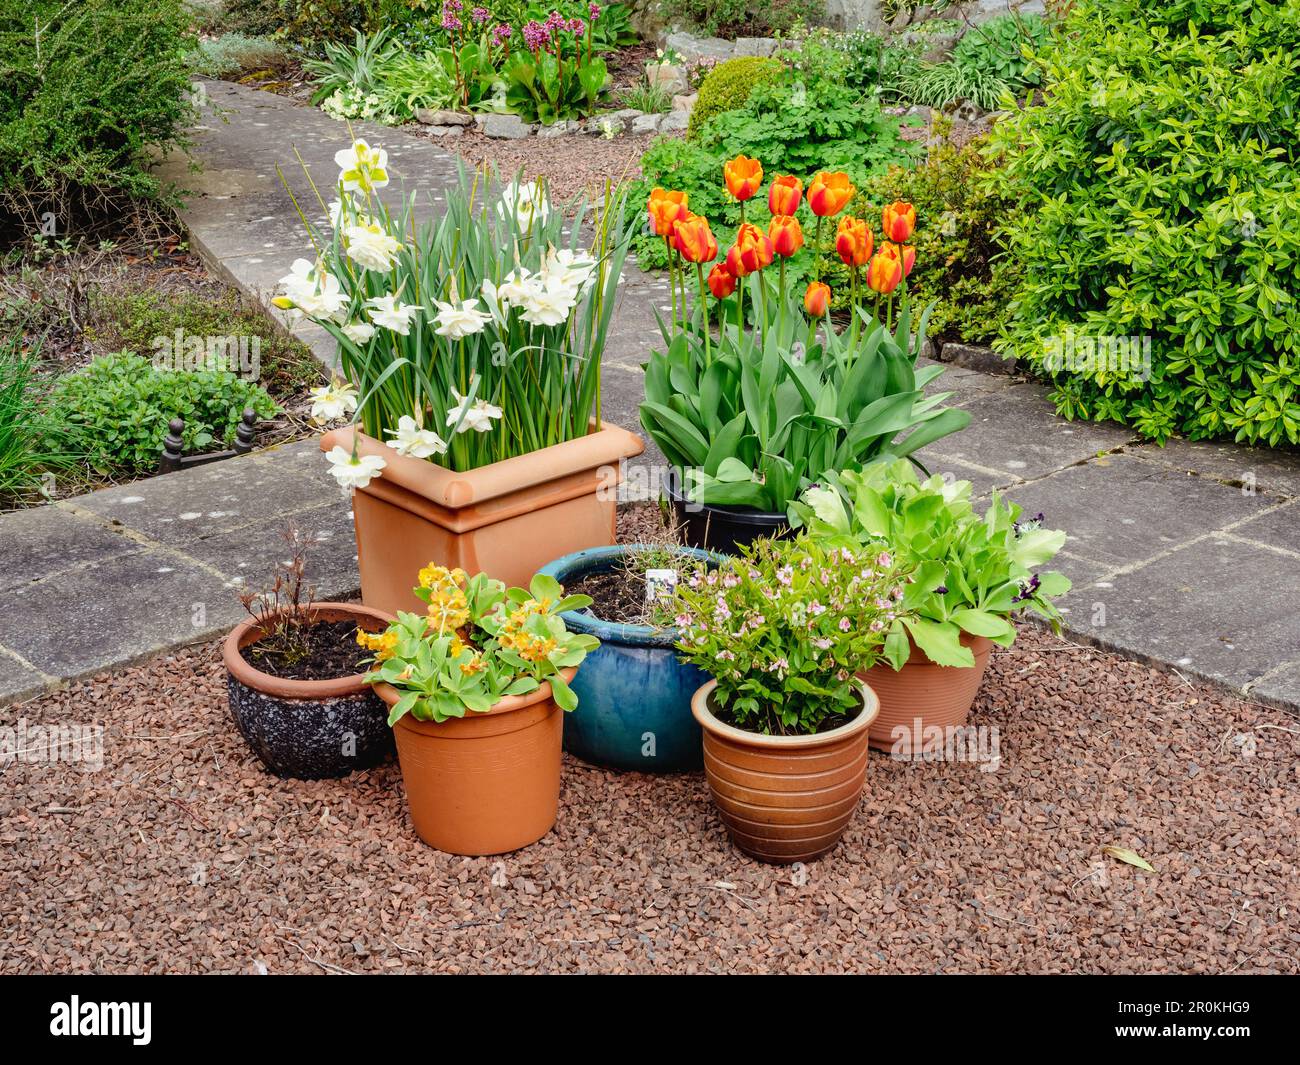 Display of plants in pots in a garden Stock Photo